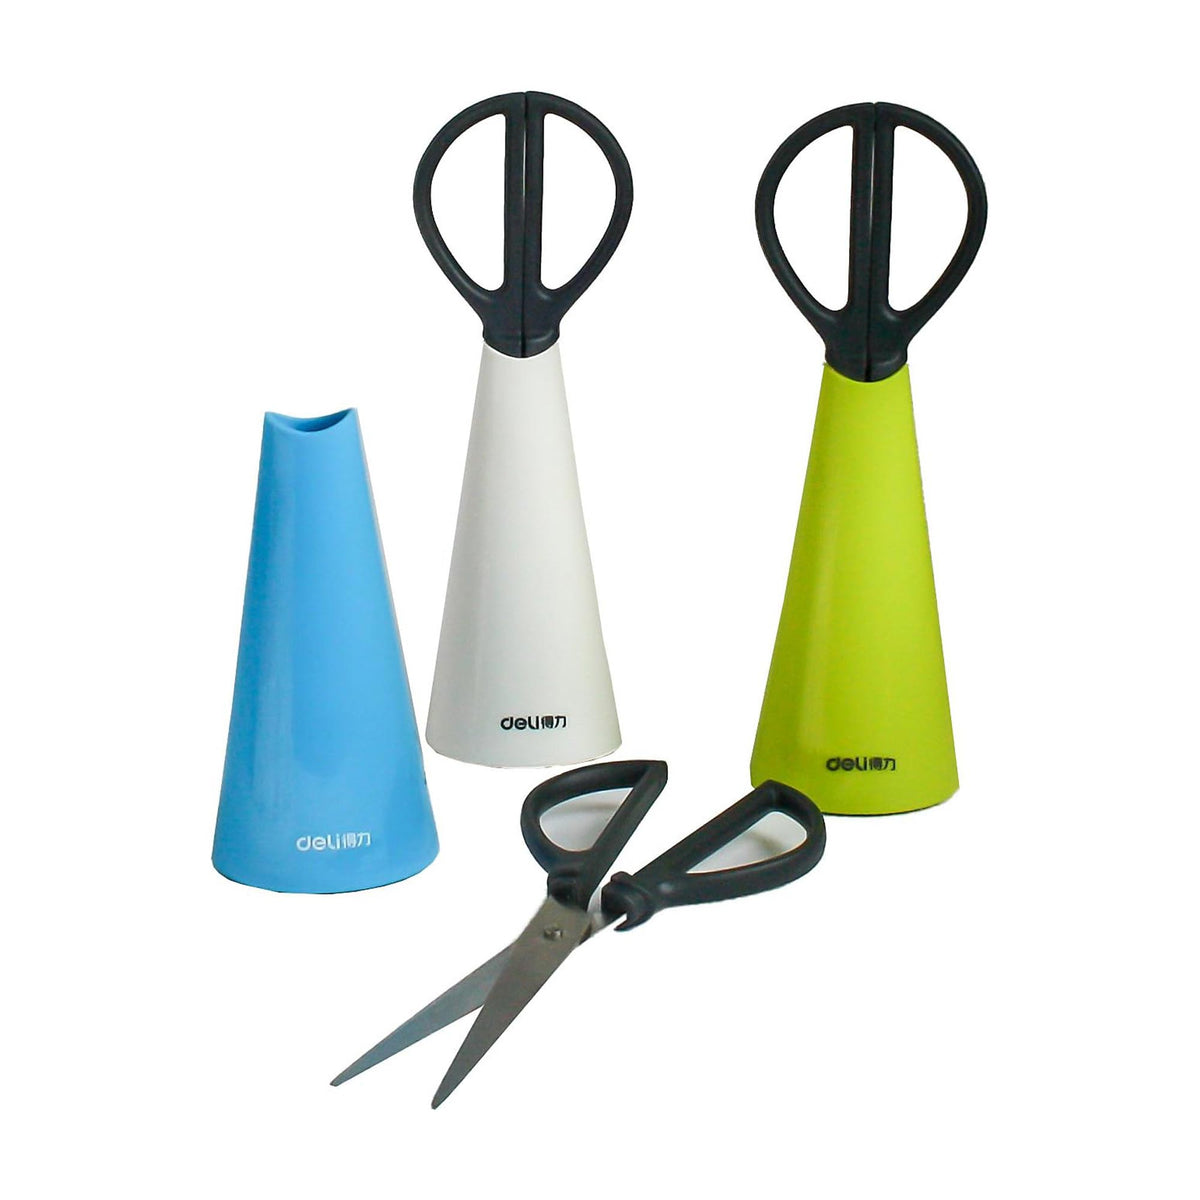 Handheld Scissors with Stand - Compact and Stylish (Green, Blue, White)